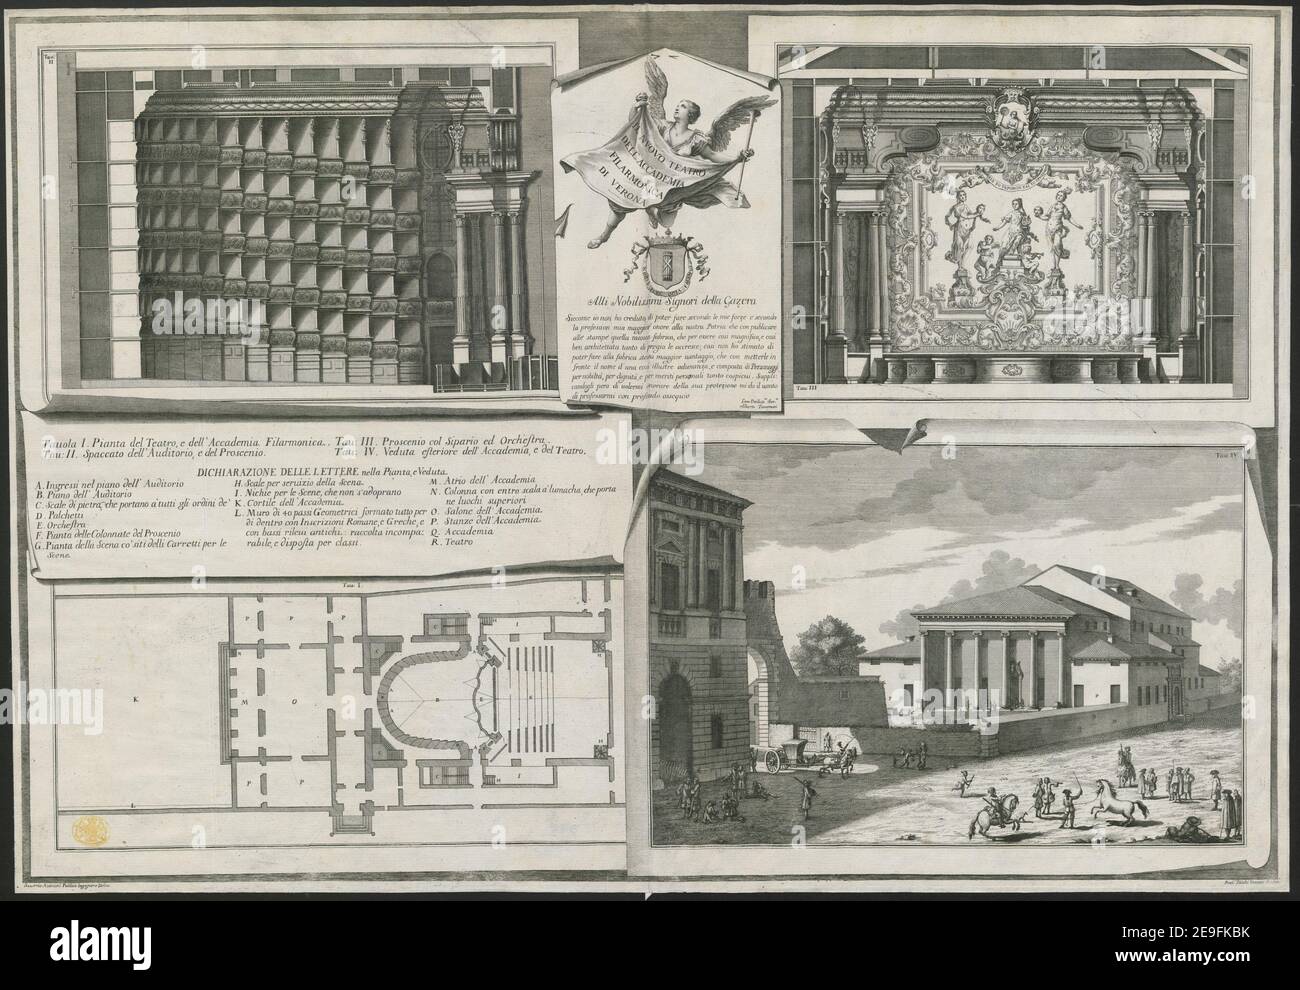 IL NUOVO TEATRO DELL' ACCADEMIA FILARMONICA DE VERONA.  Author  Zucchi, Francesco 79.41.f. Place of publication: [Verona] Publisher: [publisher not identified] Date of publication: [about 1750]  Item type: 1 print Medium: etching and engraving Dimensions: sheet 49.7 x 72 cm  Former owner: George III, King of Great Britain, 1738-1820 Stock Photo